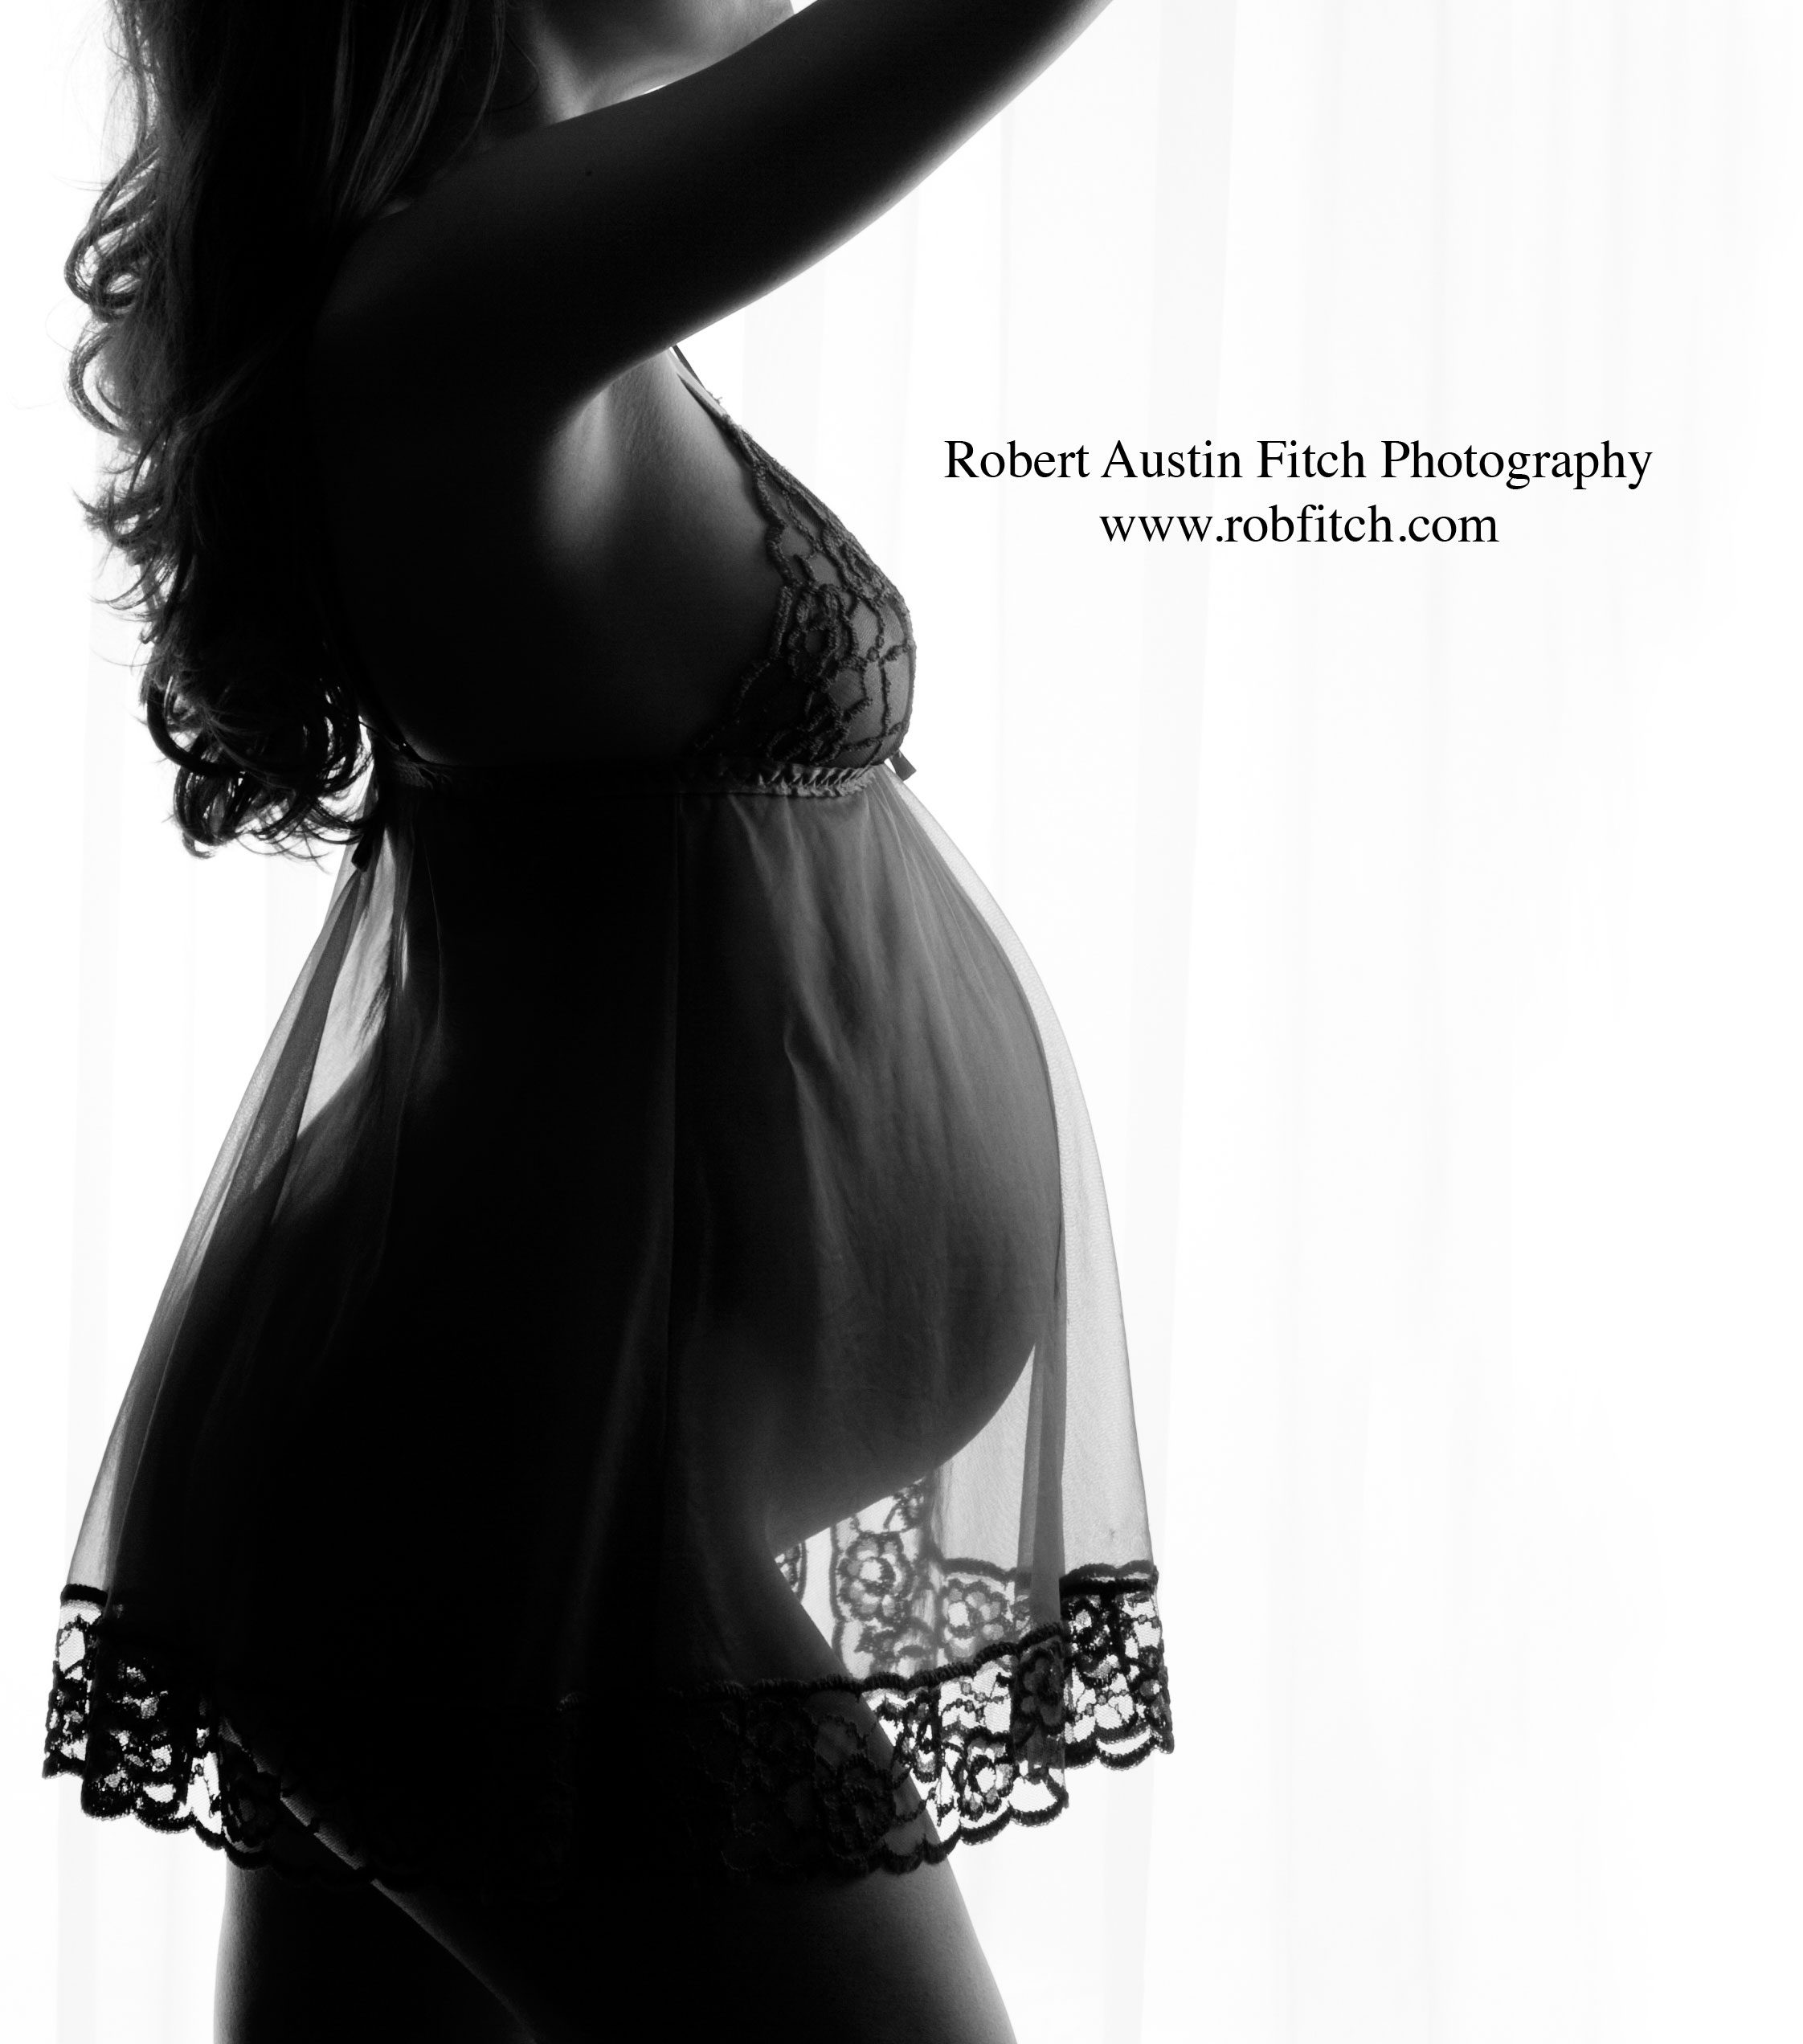 Fine Art B&W Silhouette Maternity Photo of Pregnant Woman in Sheer Black Negligee